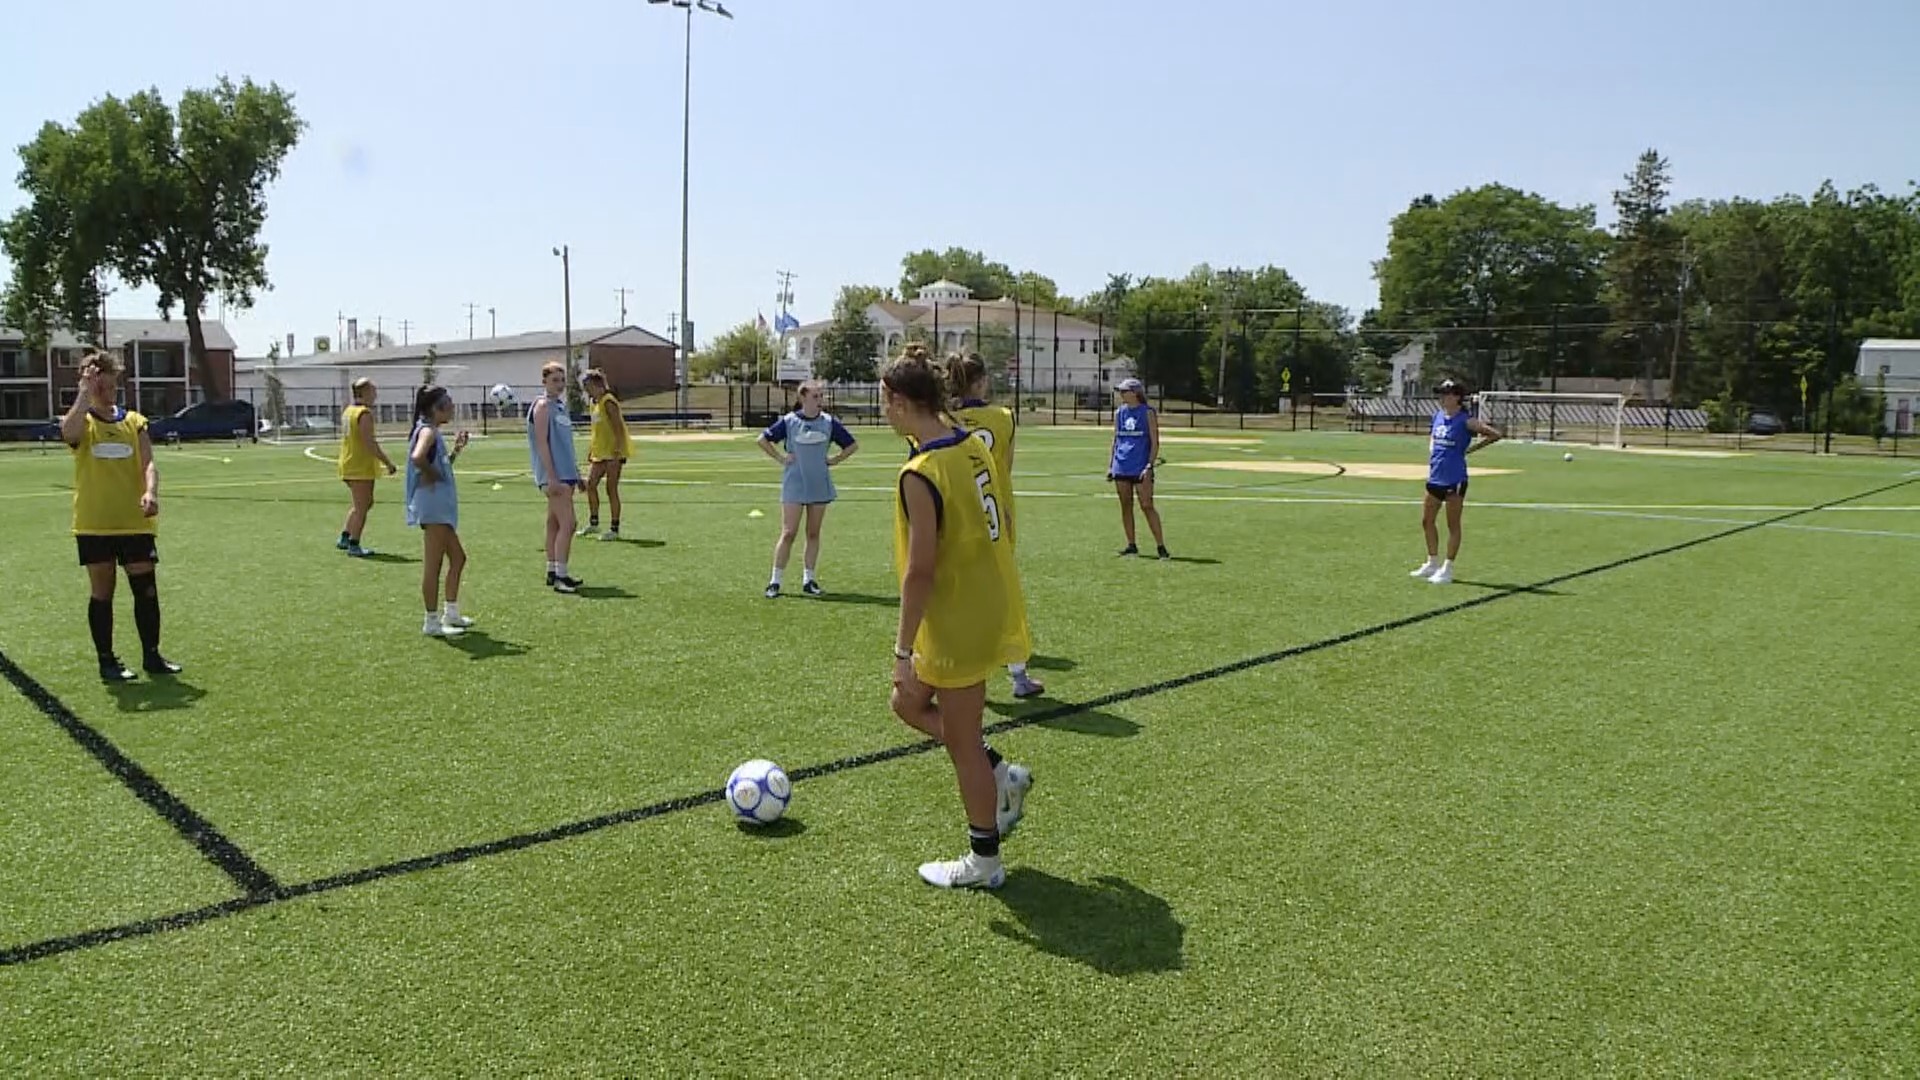 The Sanneh Foundation partnered with Allianz to host a 3-day girls soccer clinic.